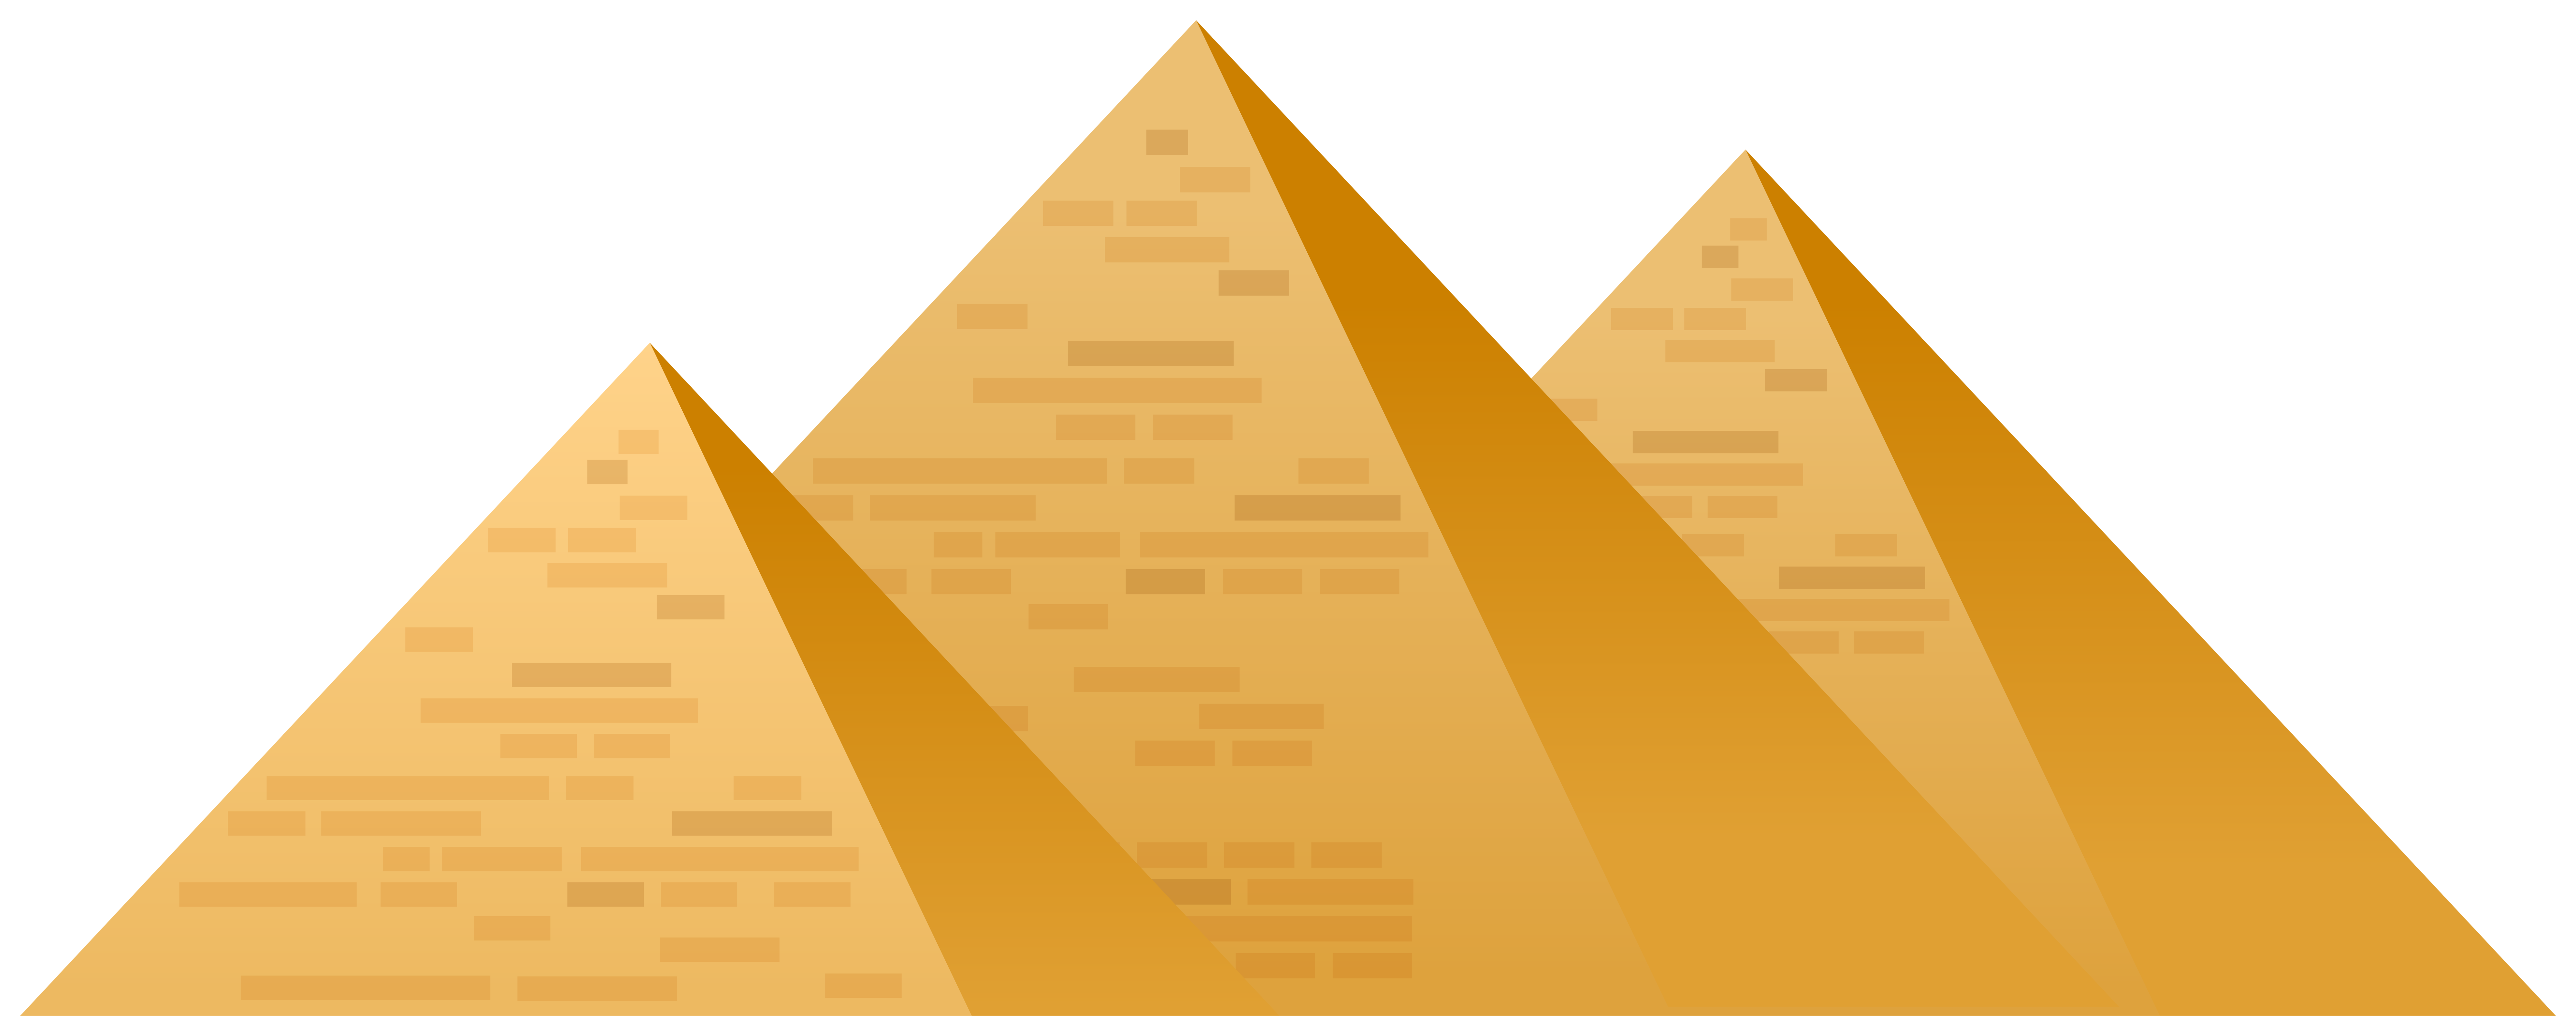 pyramid-find-and-download-best-transparent-png-clipart-images-at